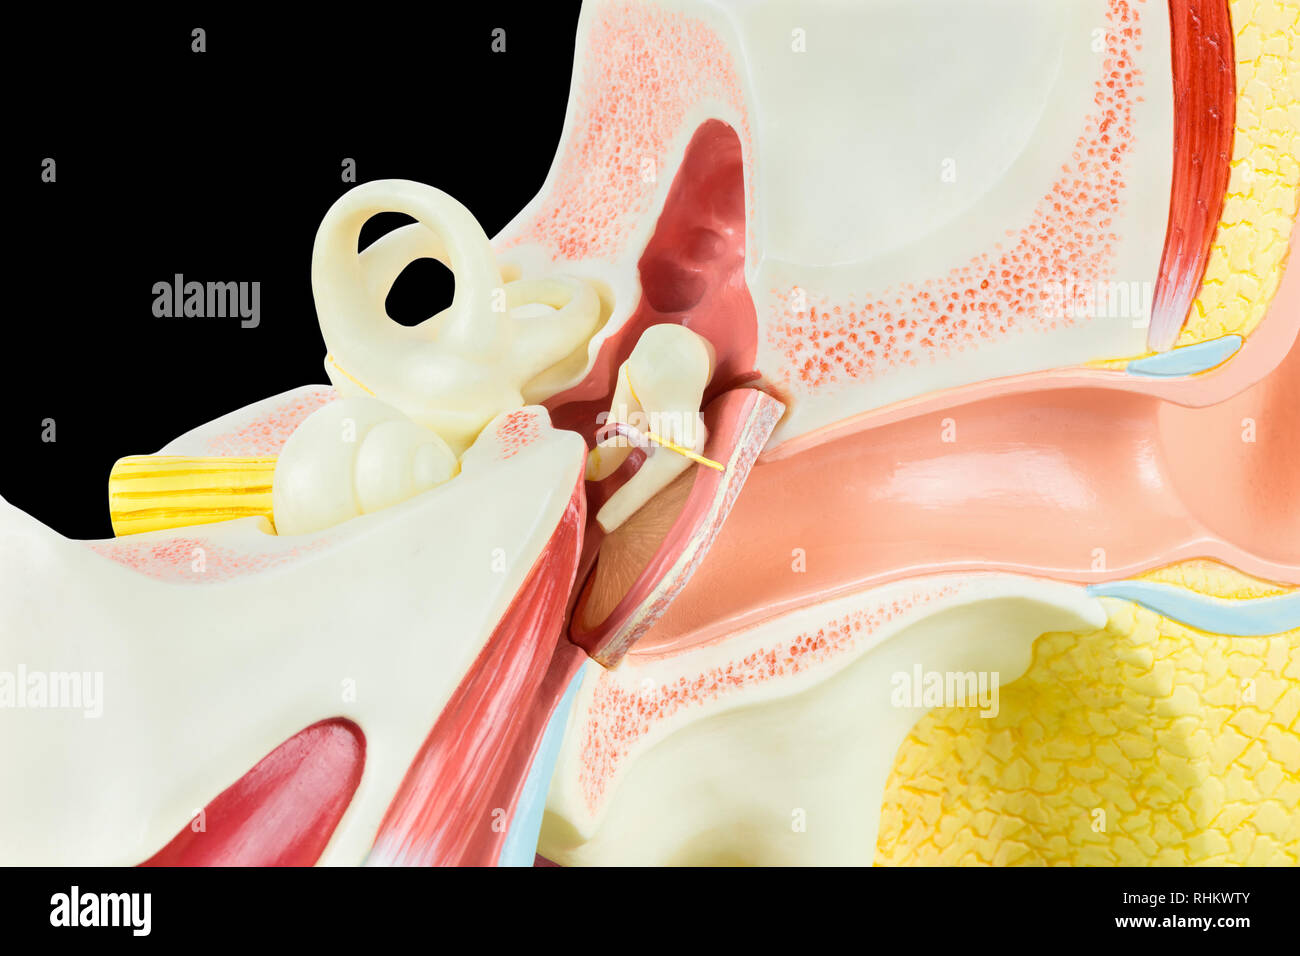 Inside of human ear model isolated on black background Stock Photo